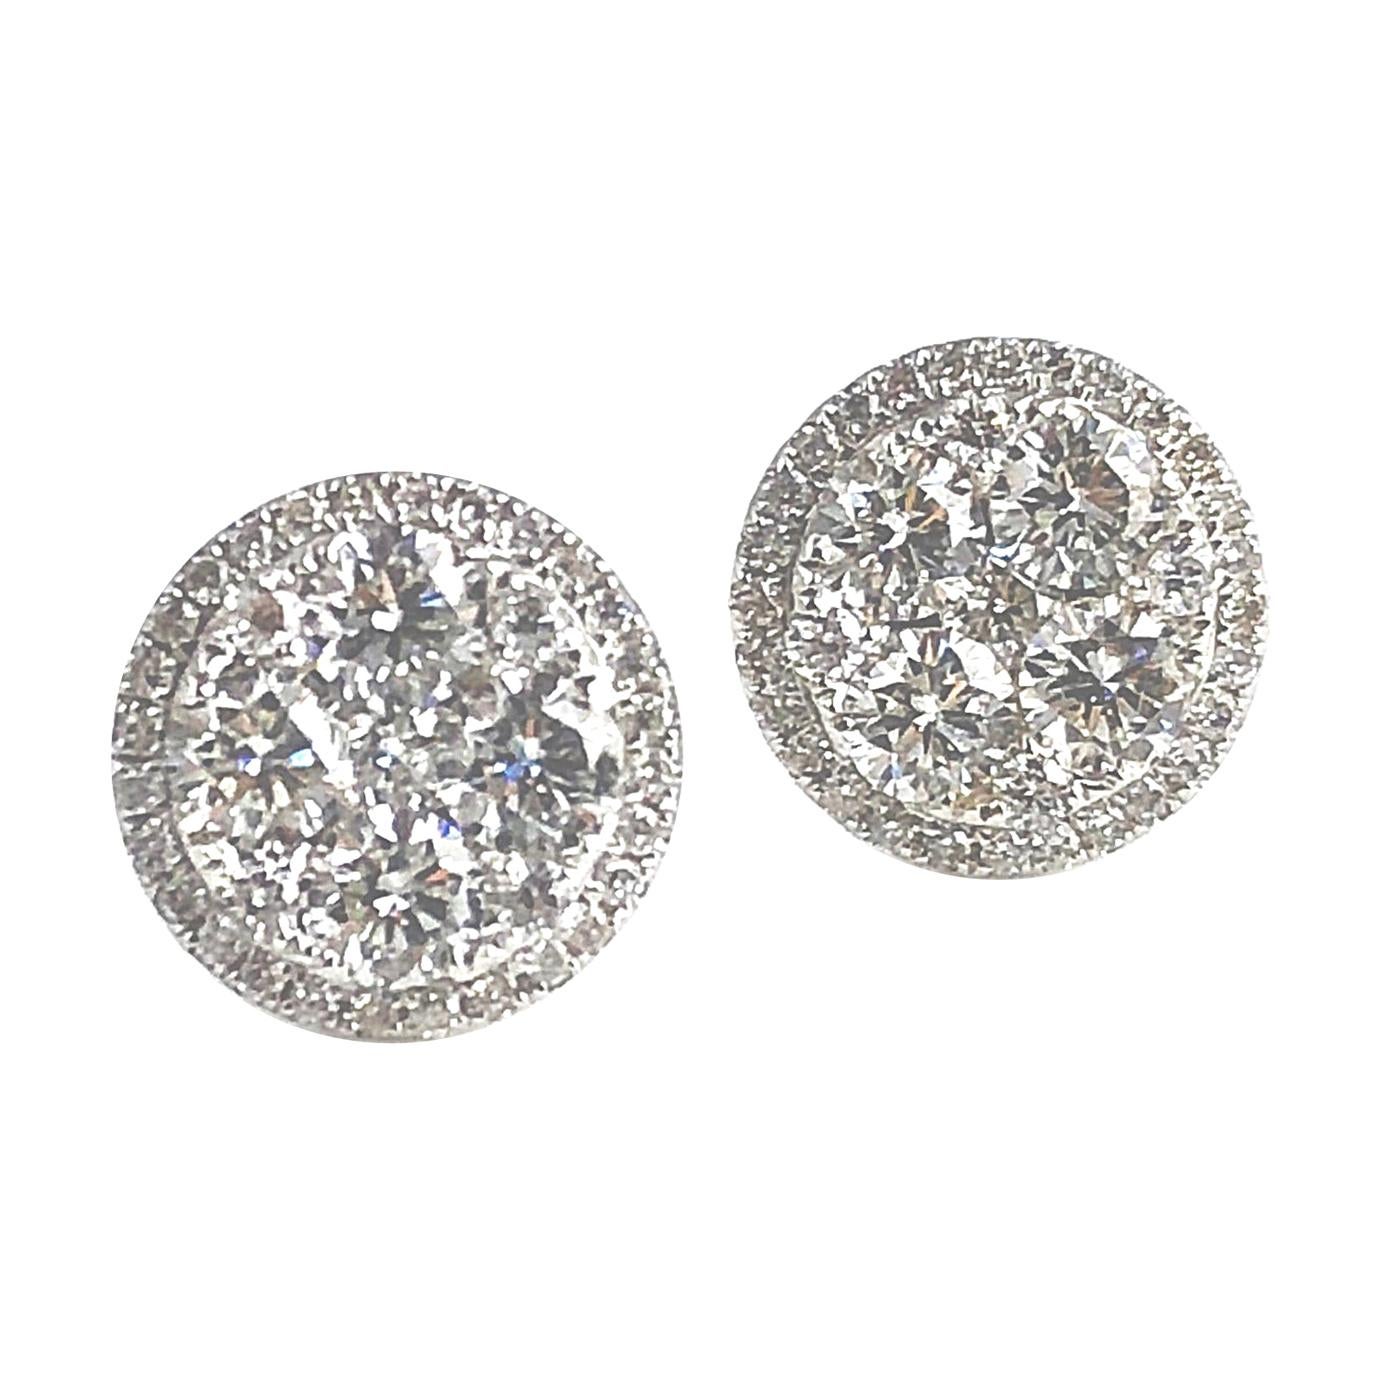 Elevate your style with these stud earrings showcasing a brilliant central cluster of round natural diamonds, elegantly encircled by an additional shimmering halo of round natural diamonds. Crafted in lustrous 14k White Gold, the total diamond